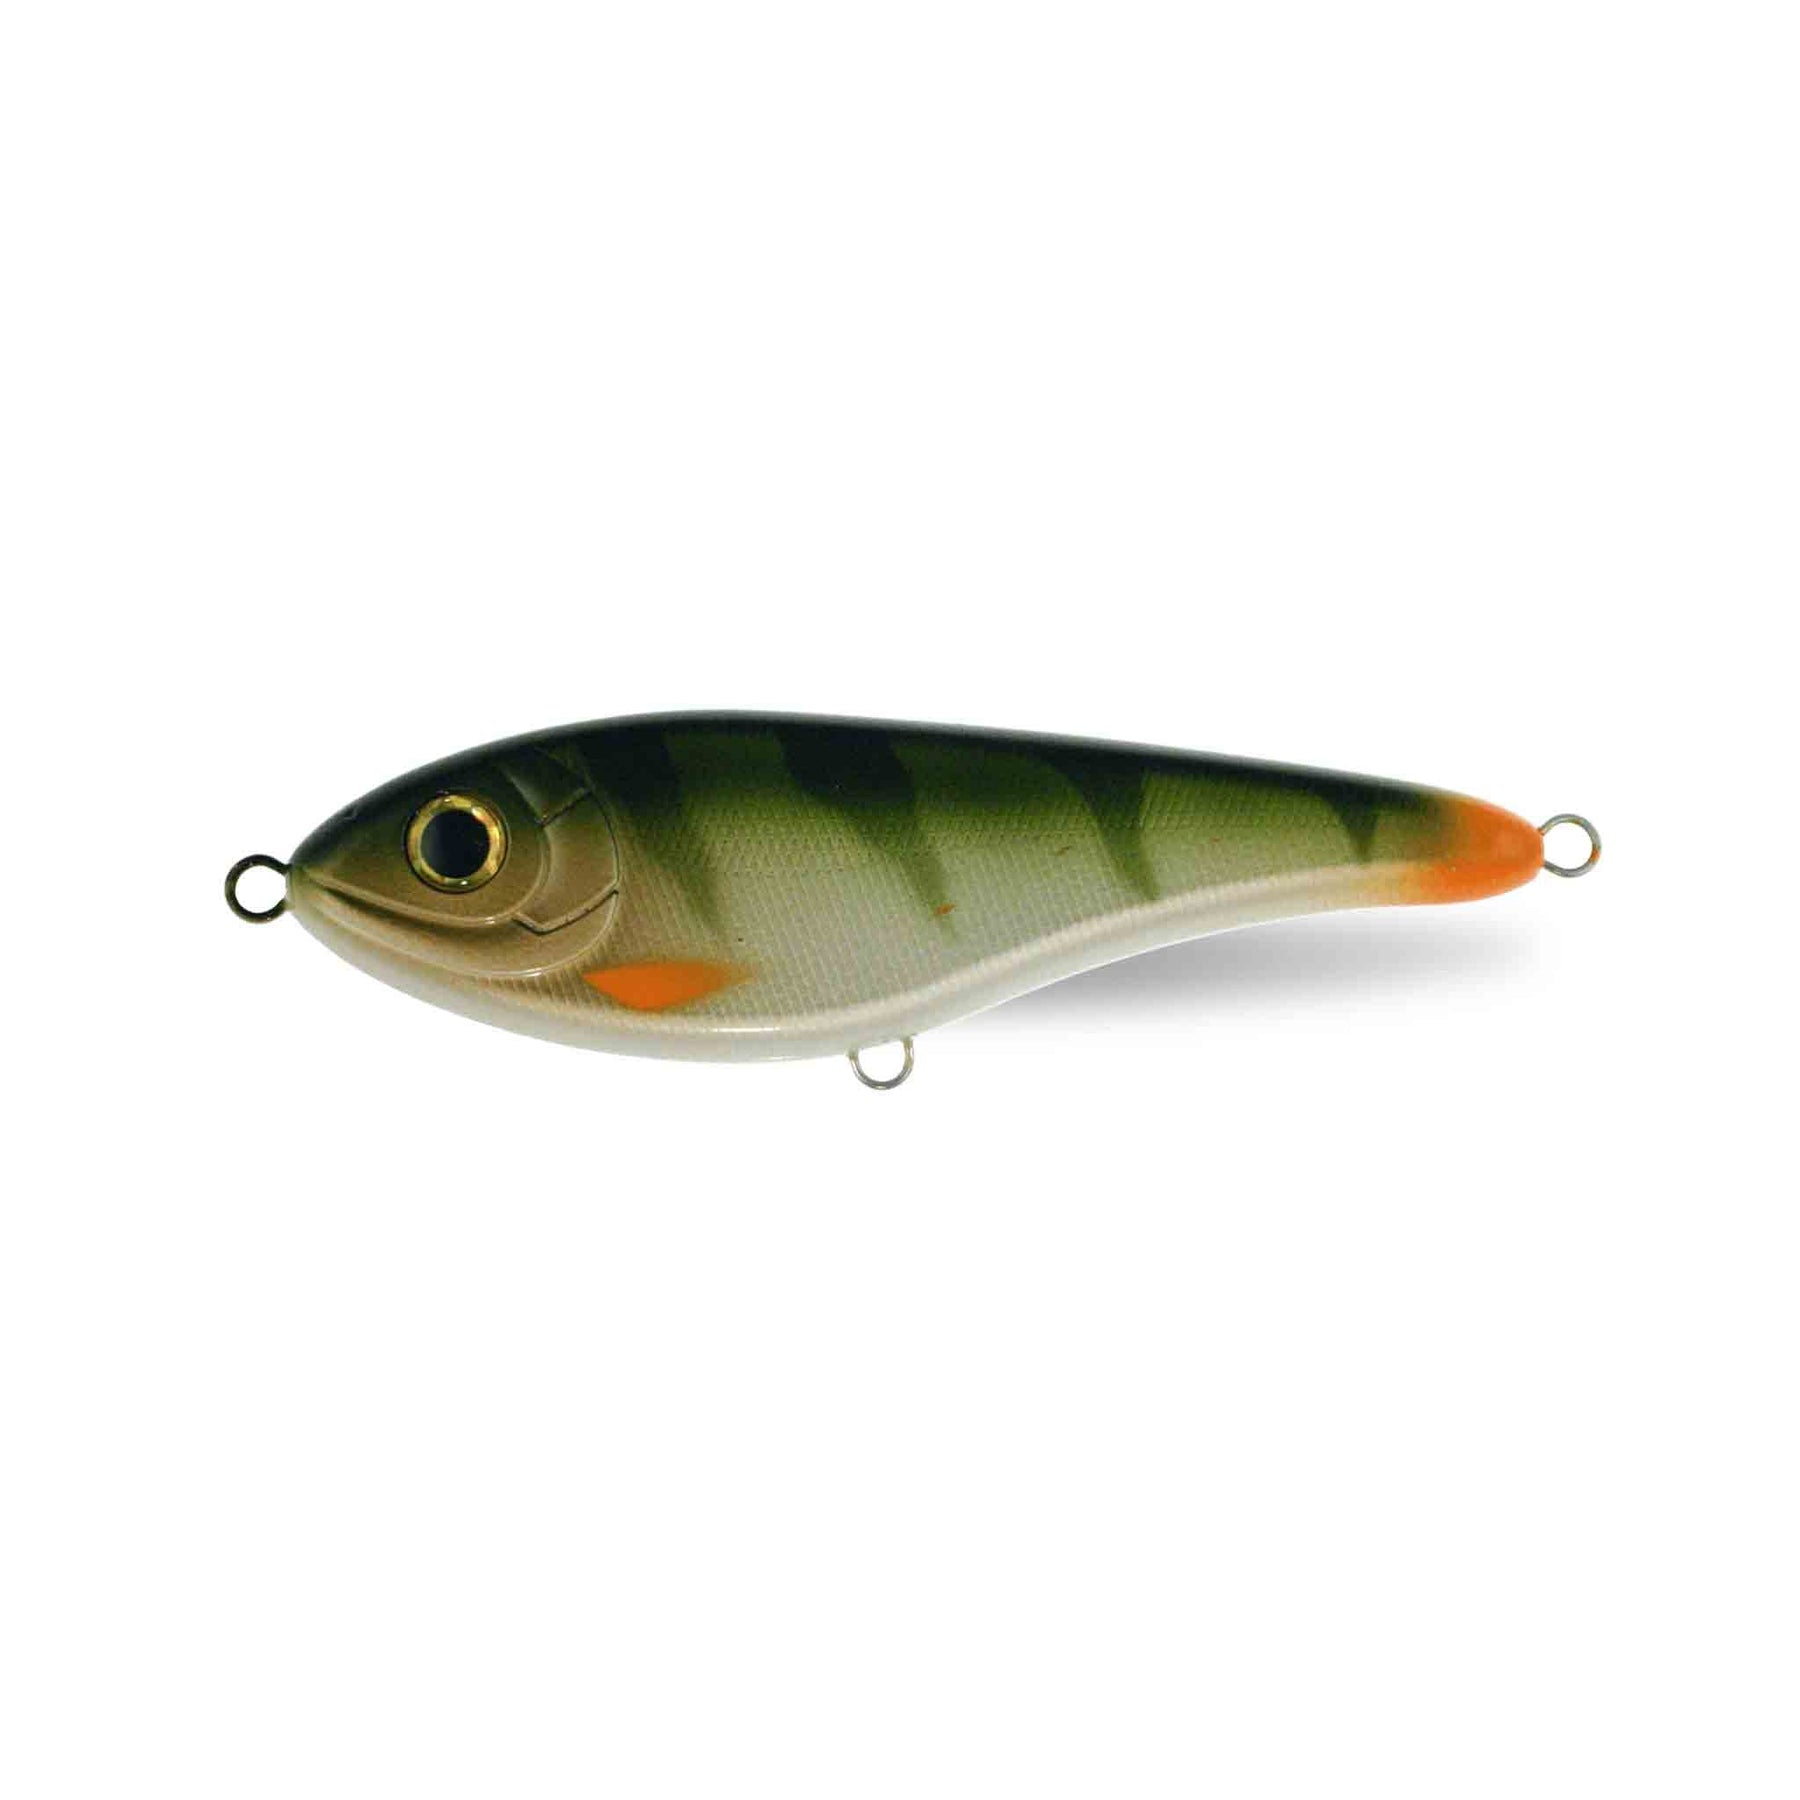 View of Jerk-Glide_Baits Strike Pro Buster Jerk II Suspending Glide Bait Naturel Perch available at EZOKO Pike and Musky Shop